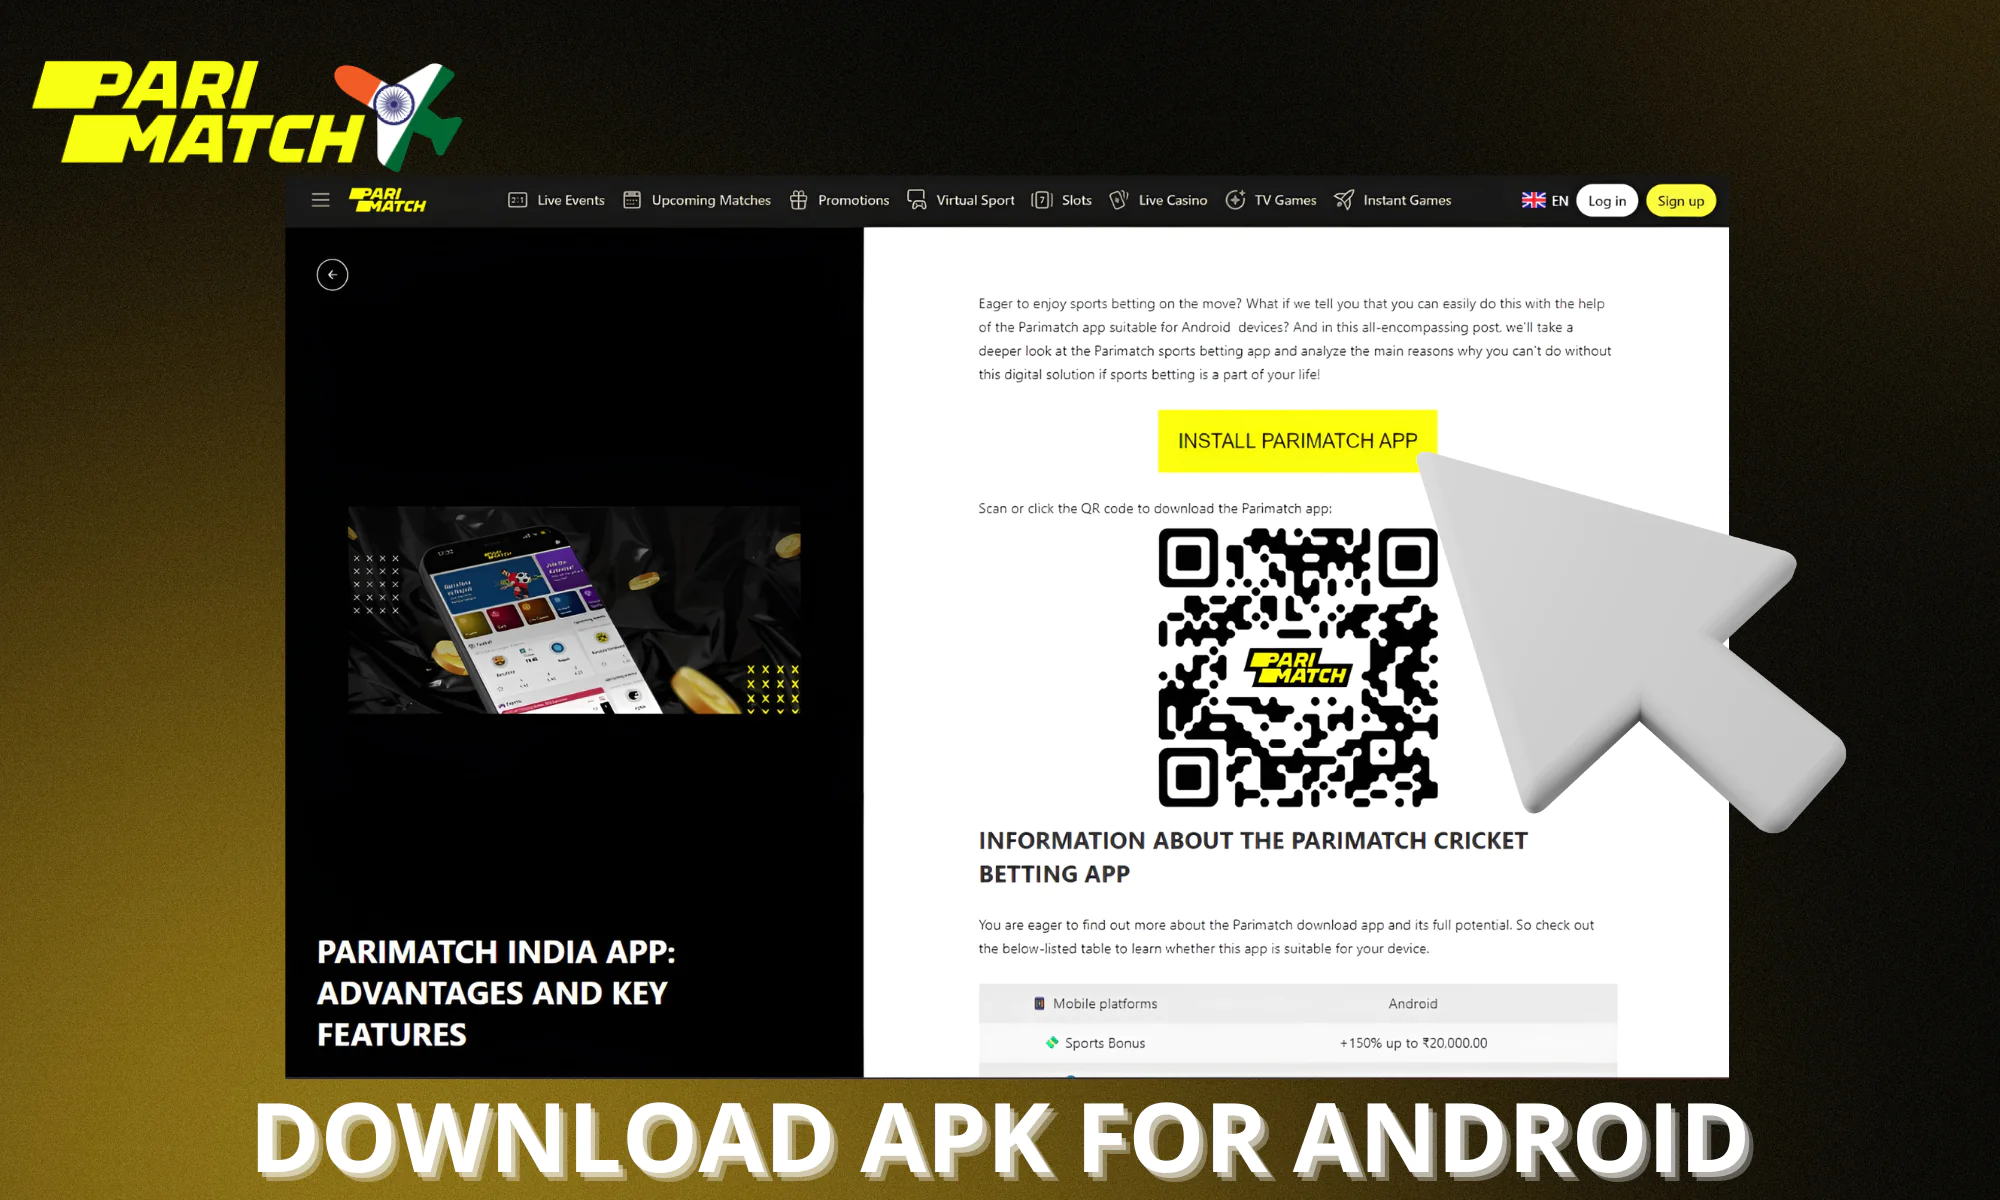 How to download the Parimatch Aviator app on Android